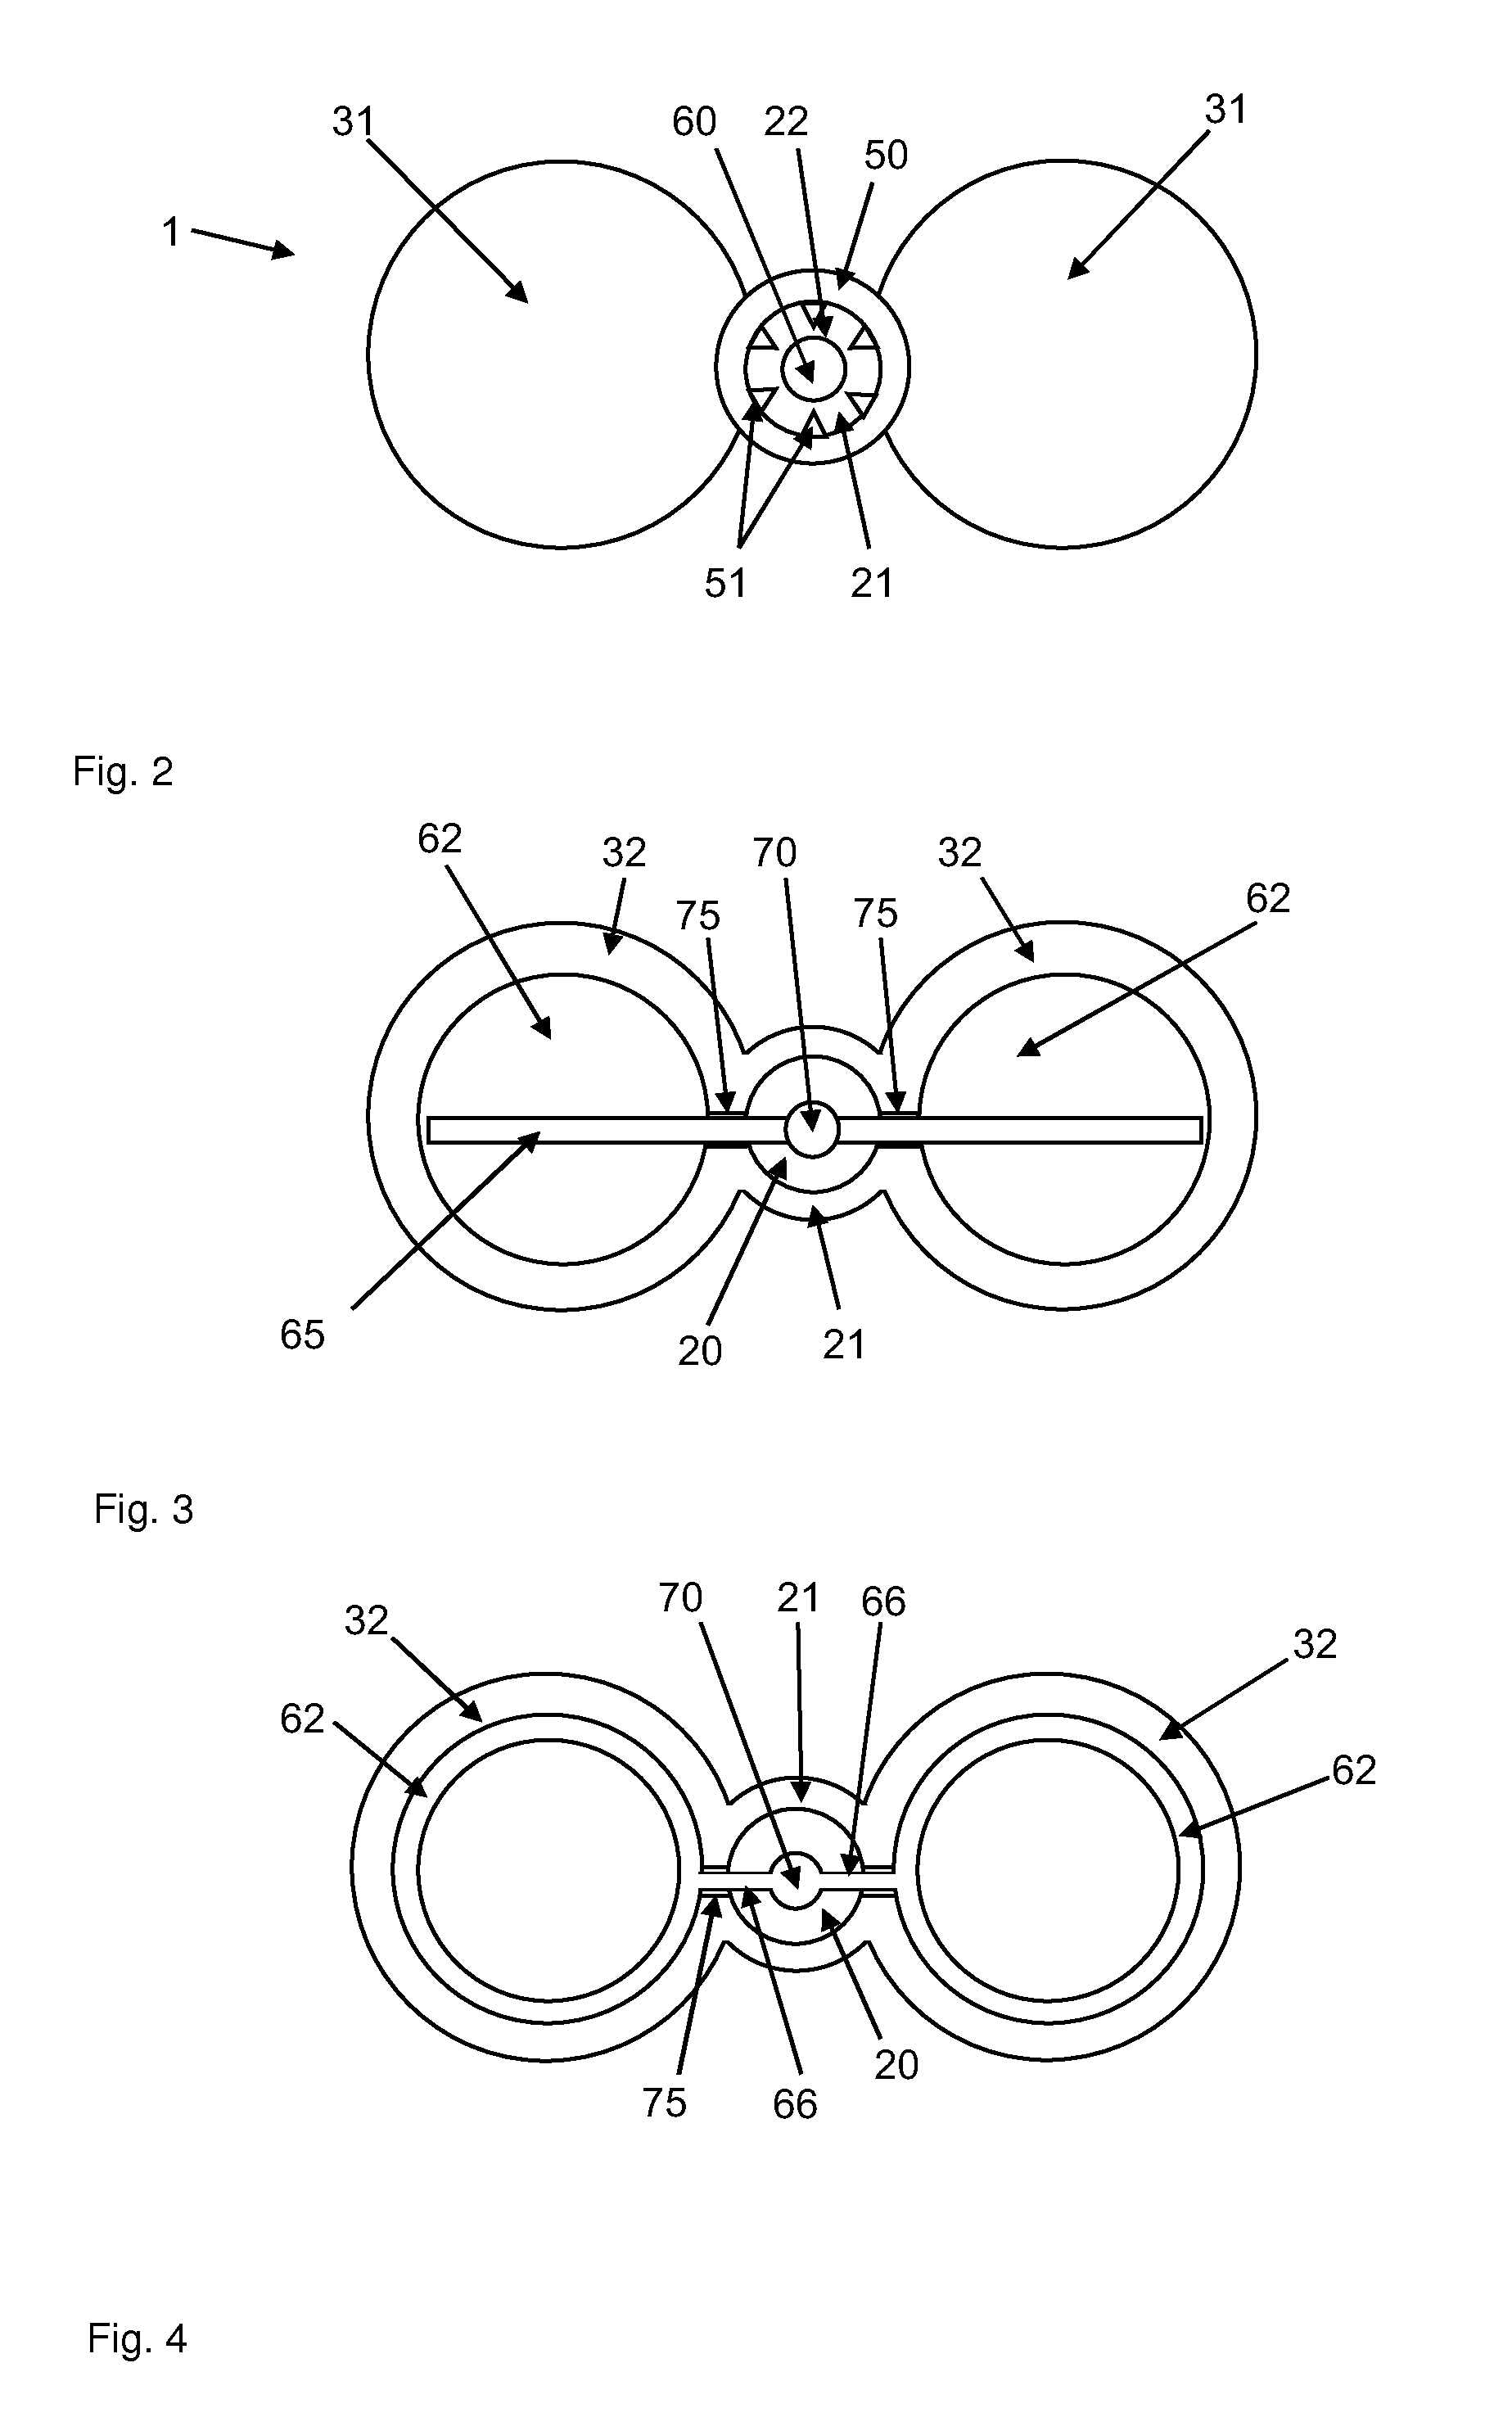 Cartridge System and Dispensing Tube For Said Cartridge System